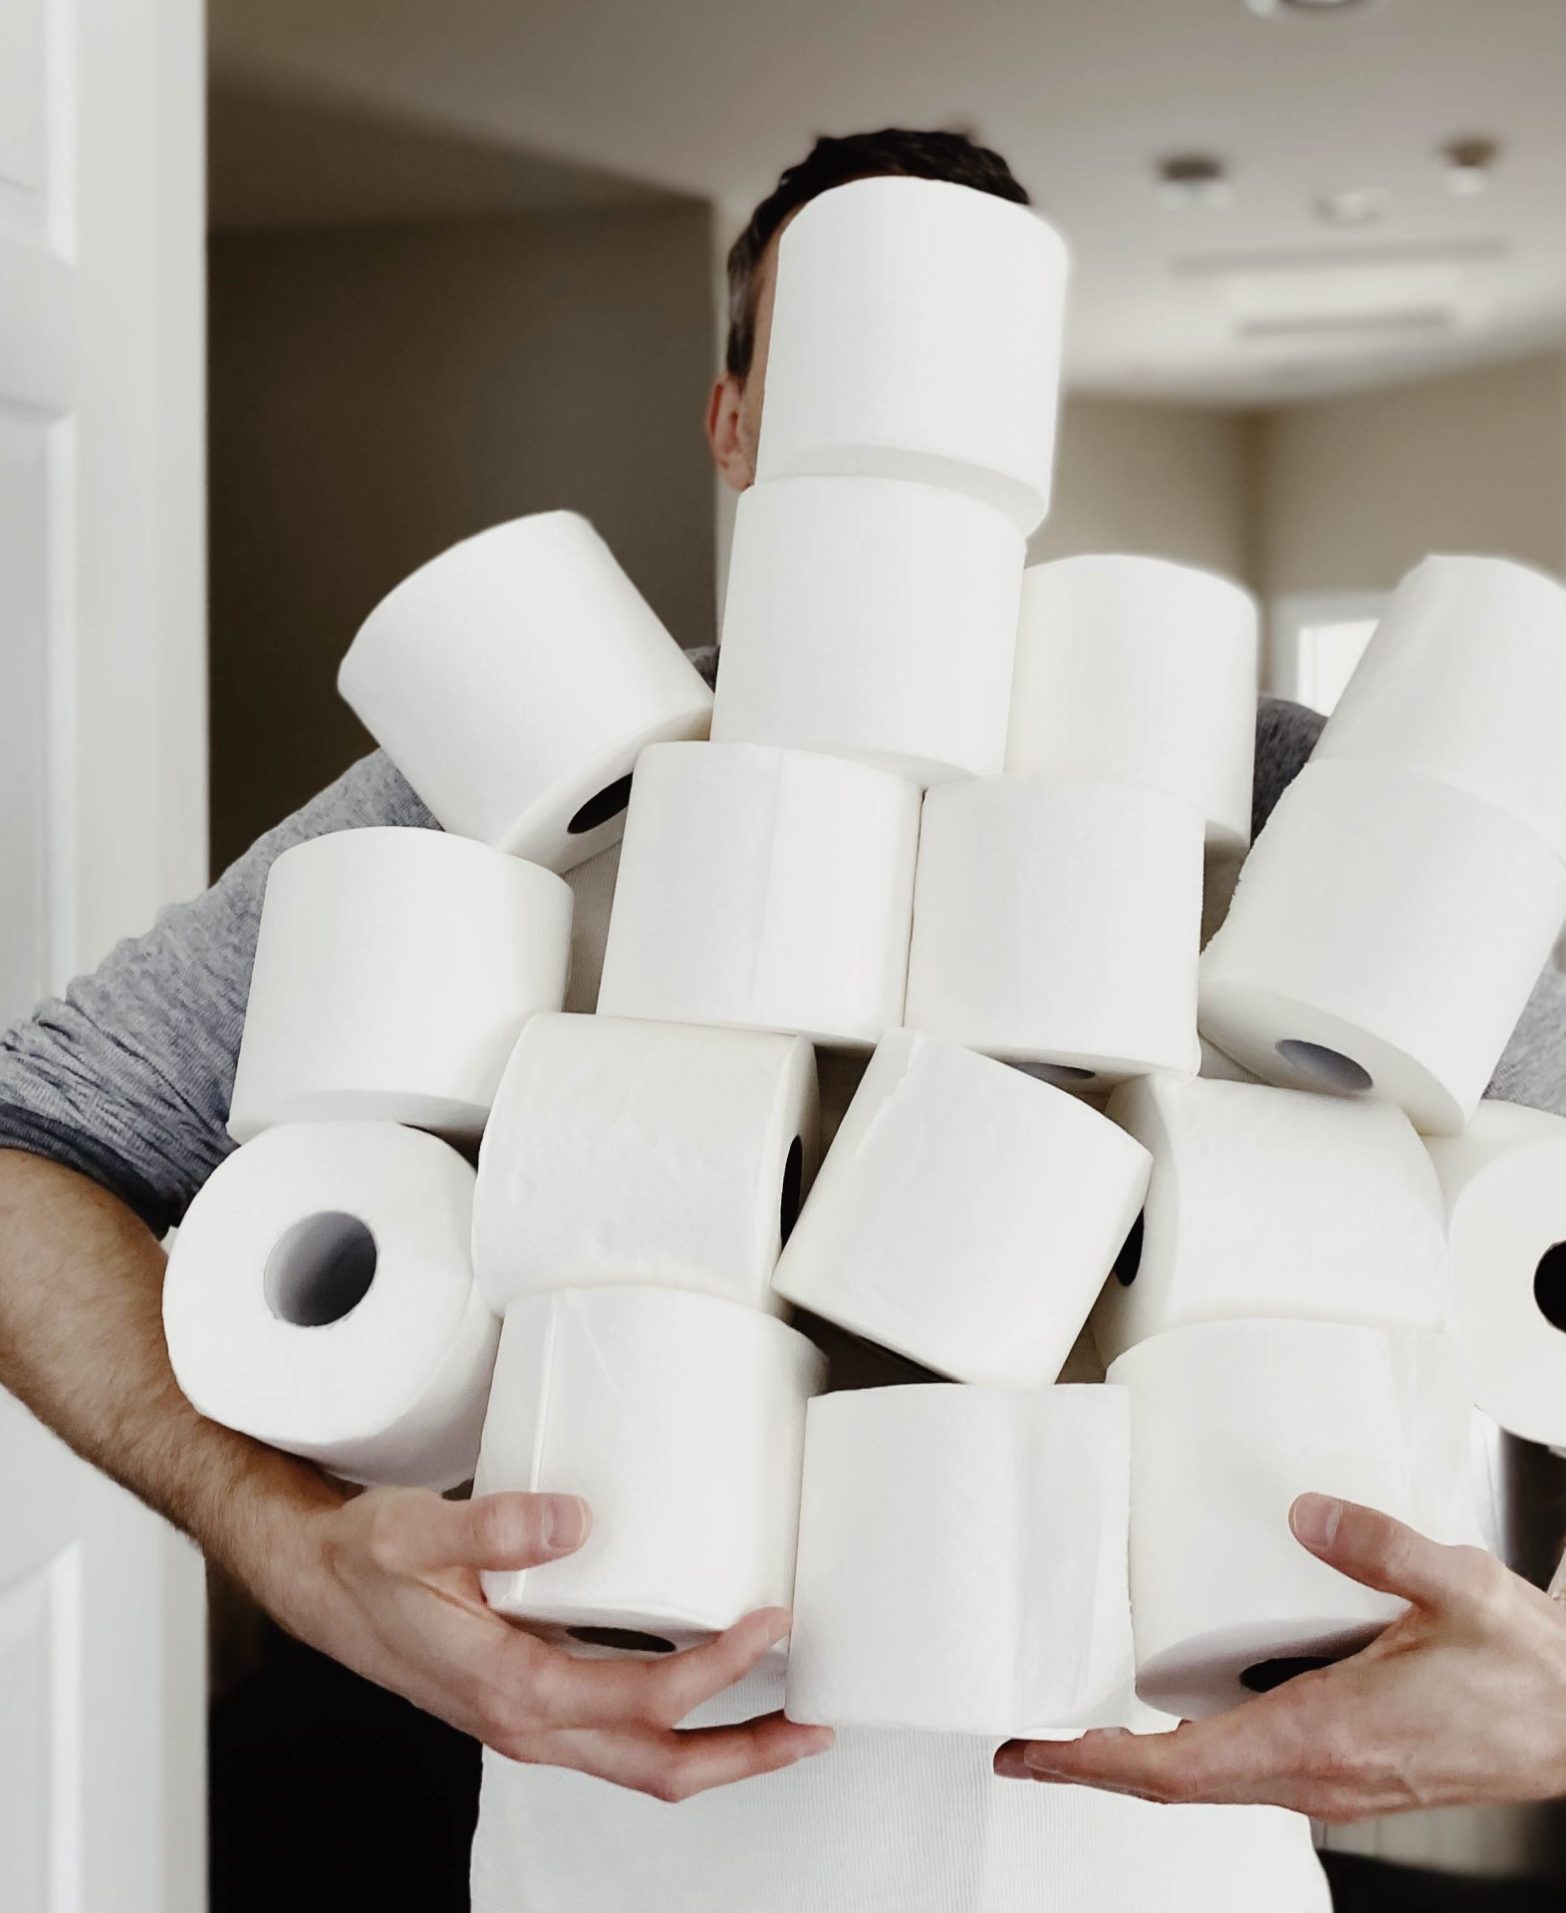 hoarding-toilet-paper-getty-theconversation-scaled